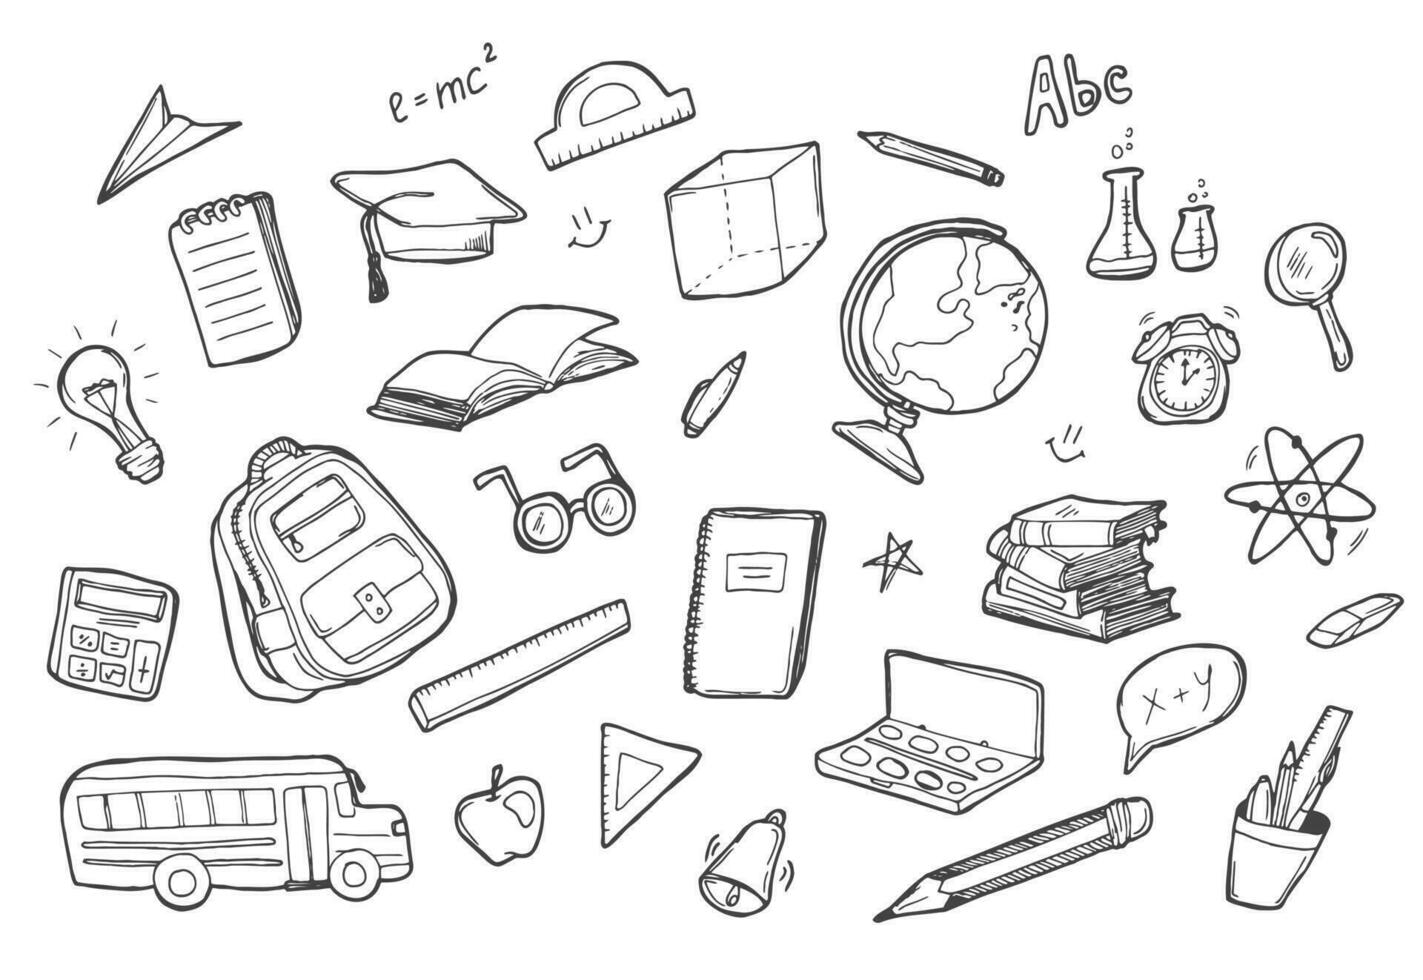 School element in doodle or sketch style on notebook illustration vector